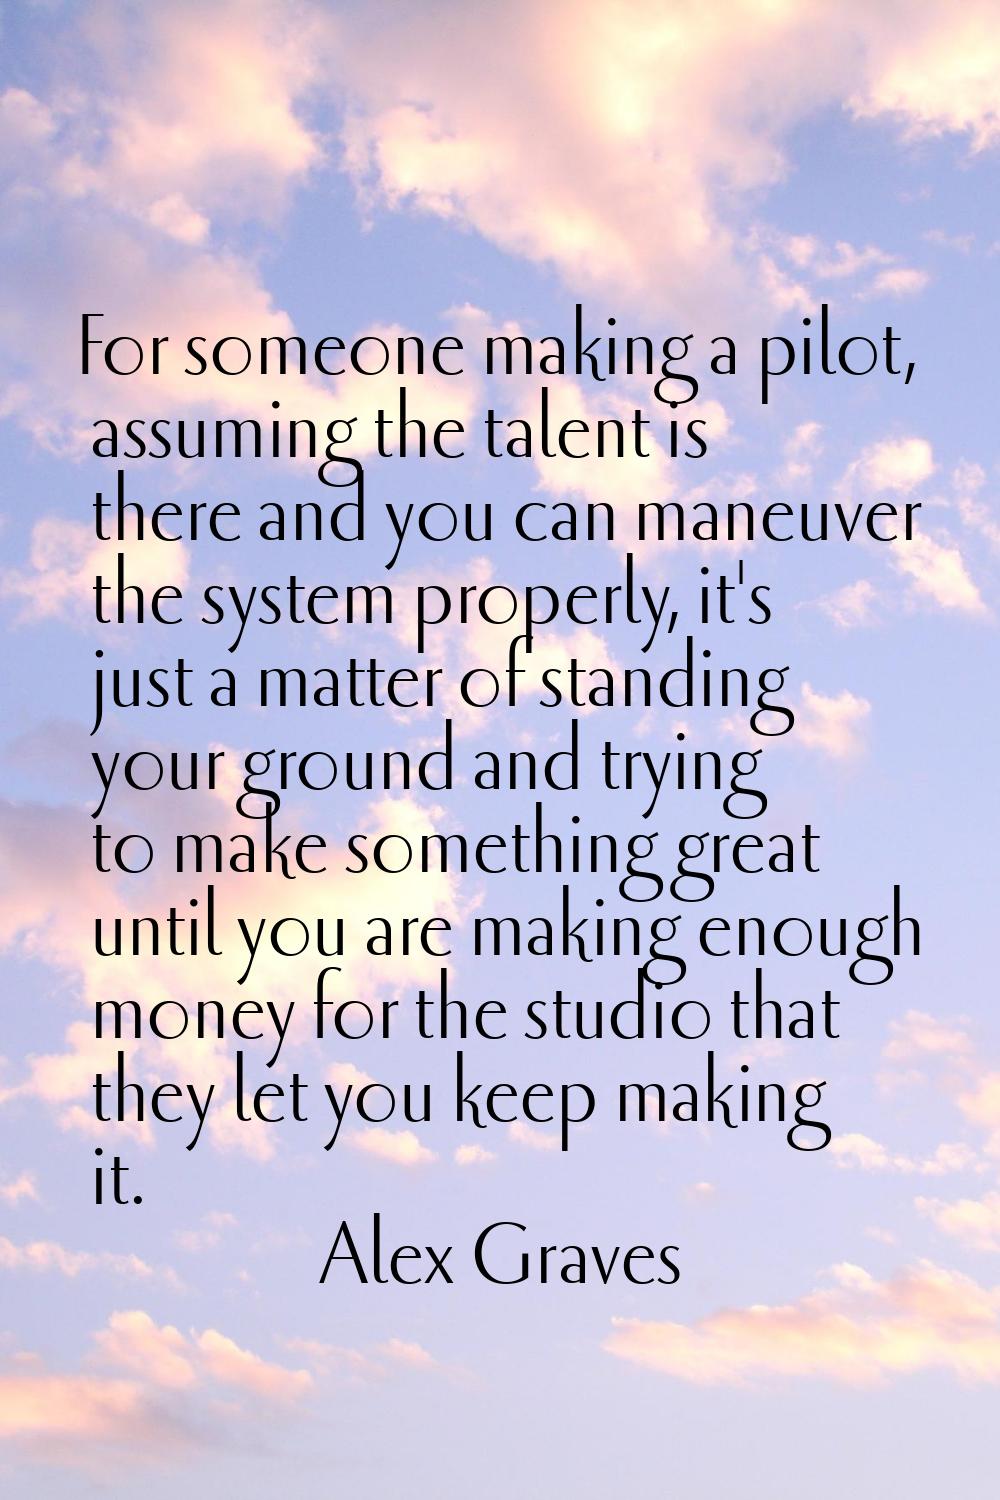 For someone making a pilot, assuming the talent is there and you can maneuver the system properly, 